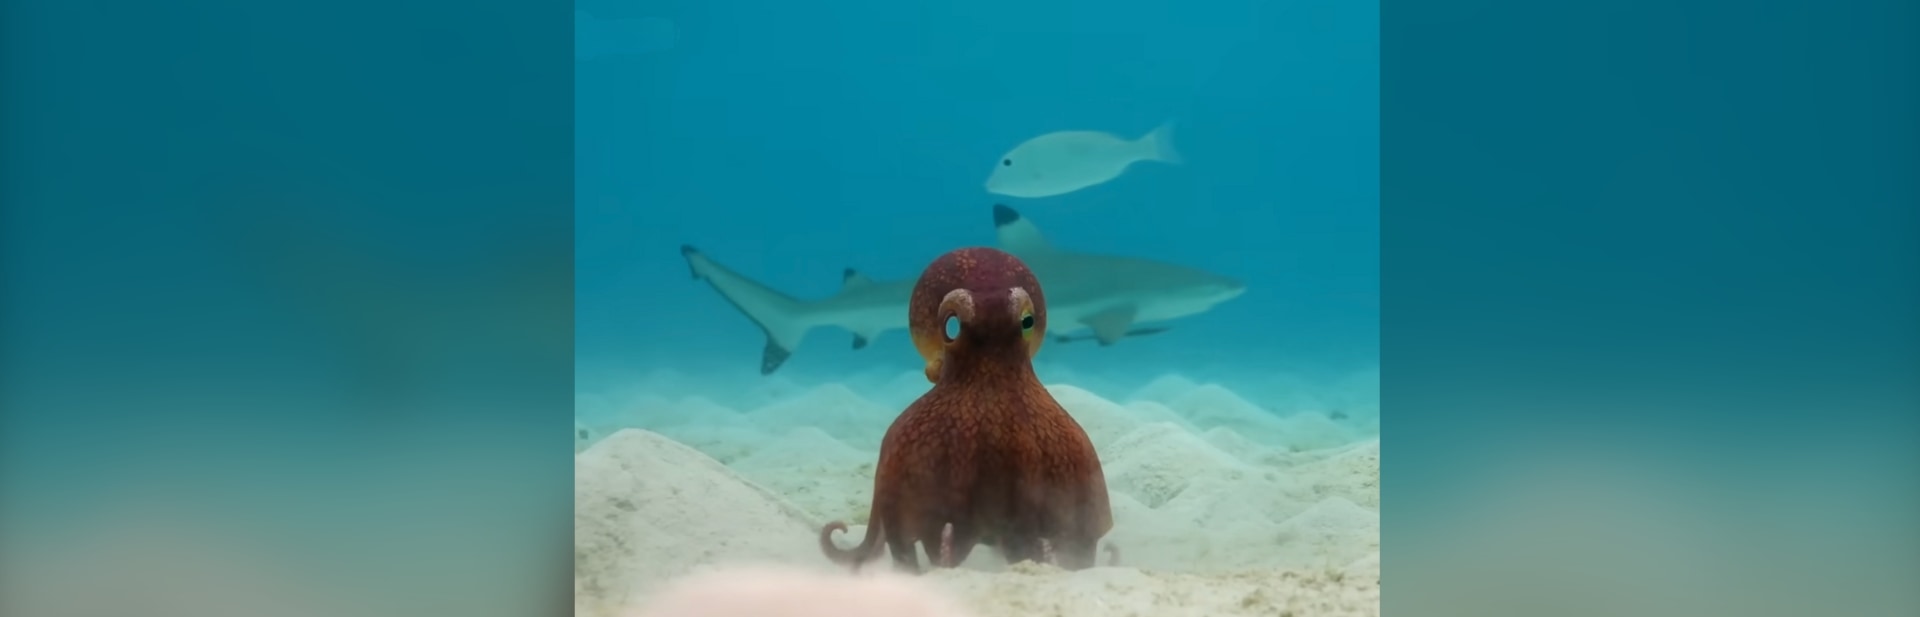 Octopus Cheats Death with Help from an Incredible Invisible Ally